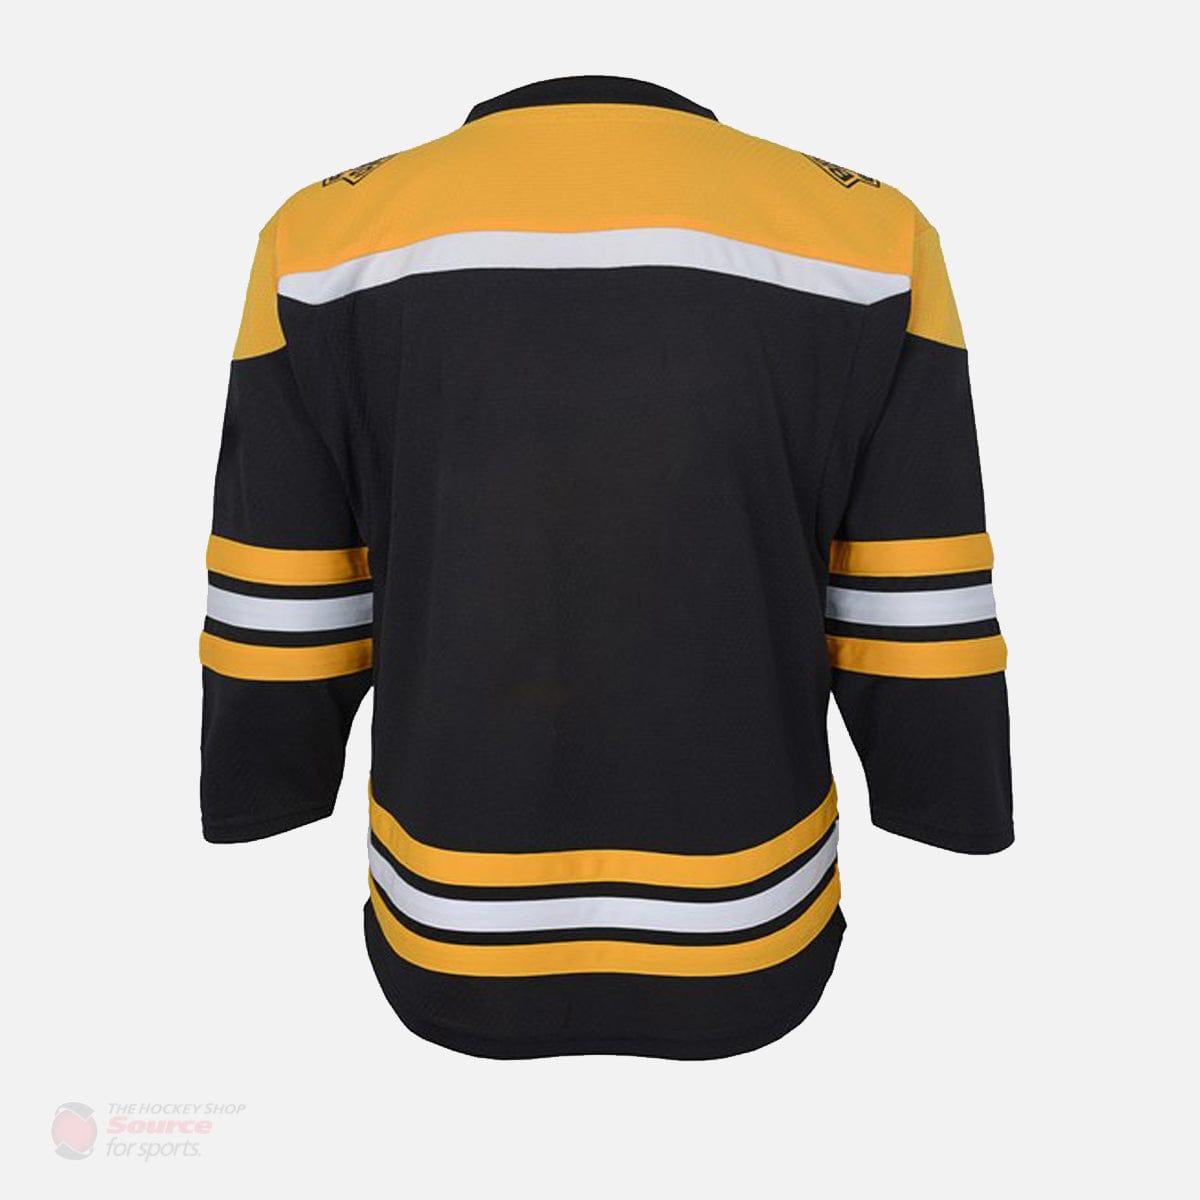 Boston Bruins Home Outer Stuff Replica Youth Jersey